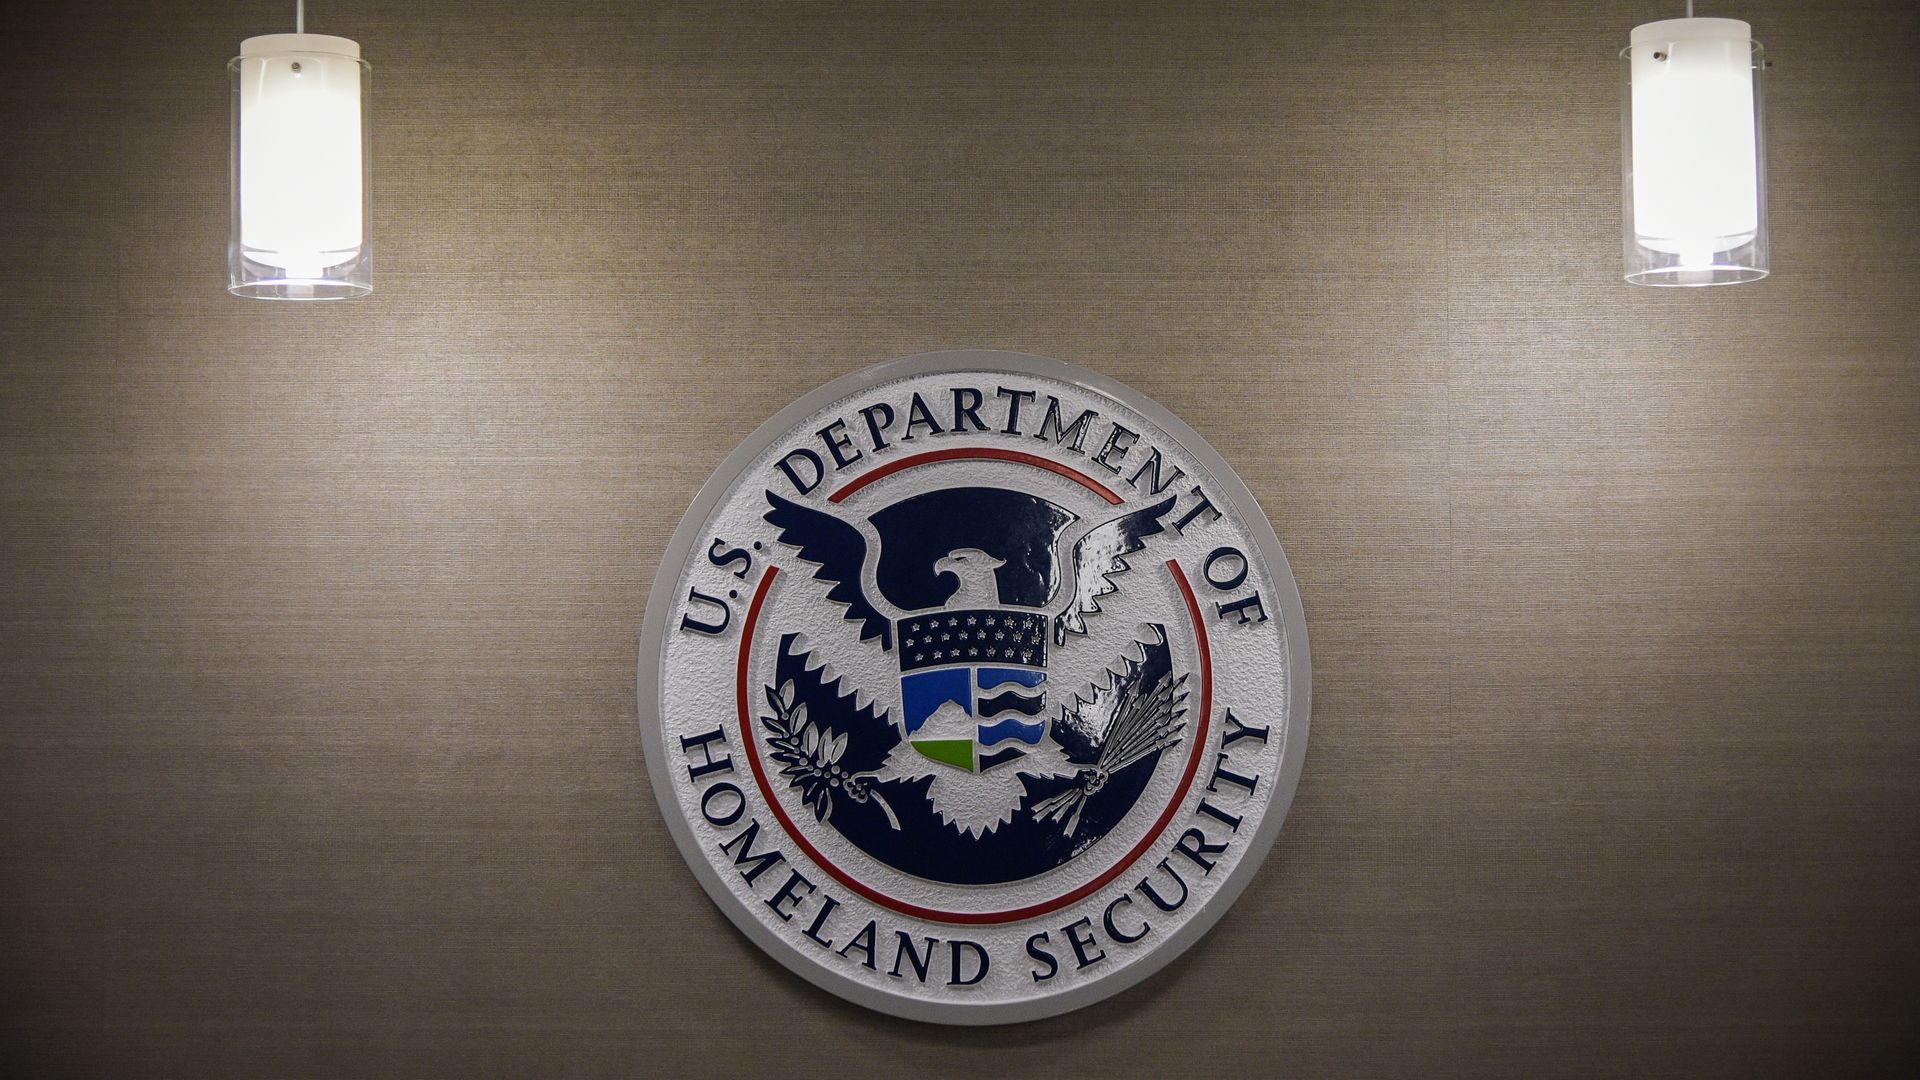 The Department of Homeland Security's logo.